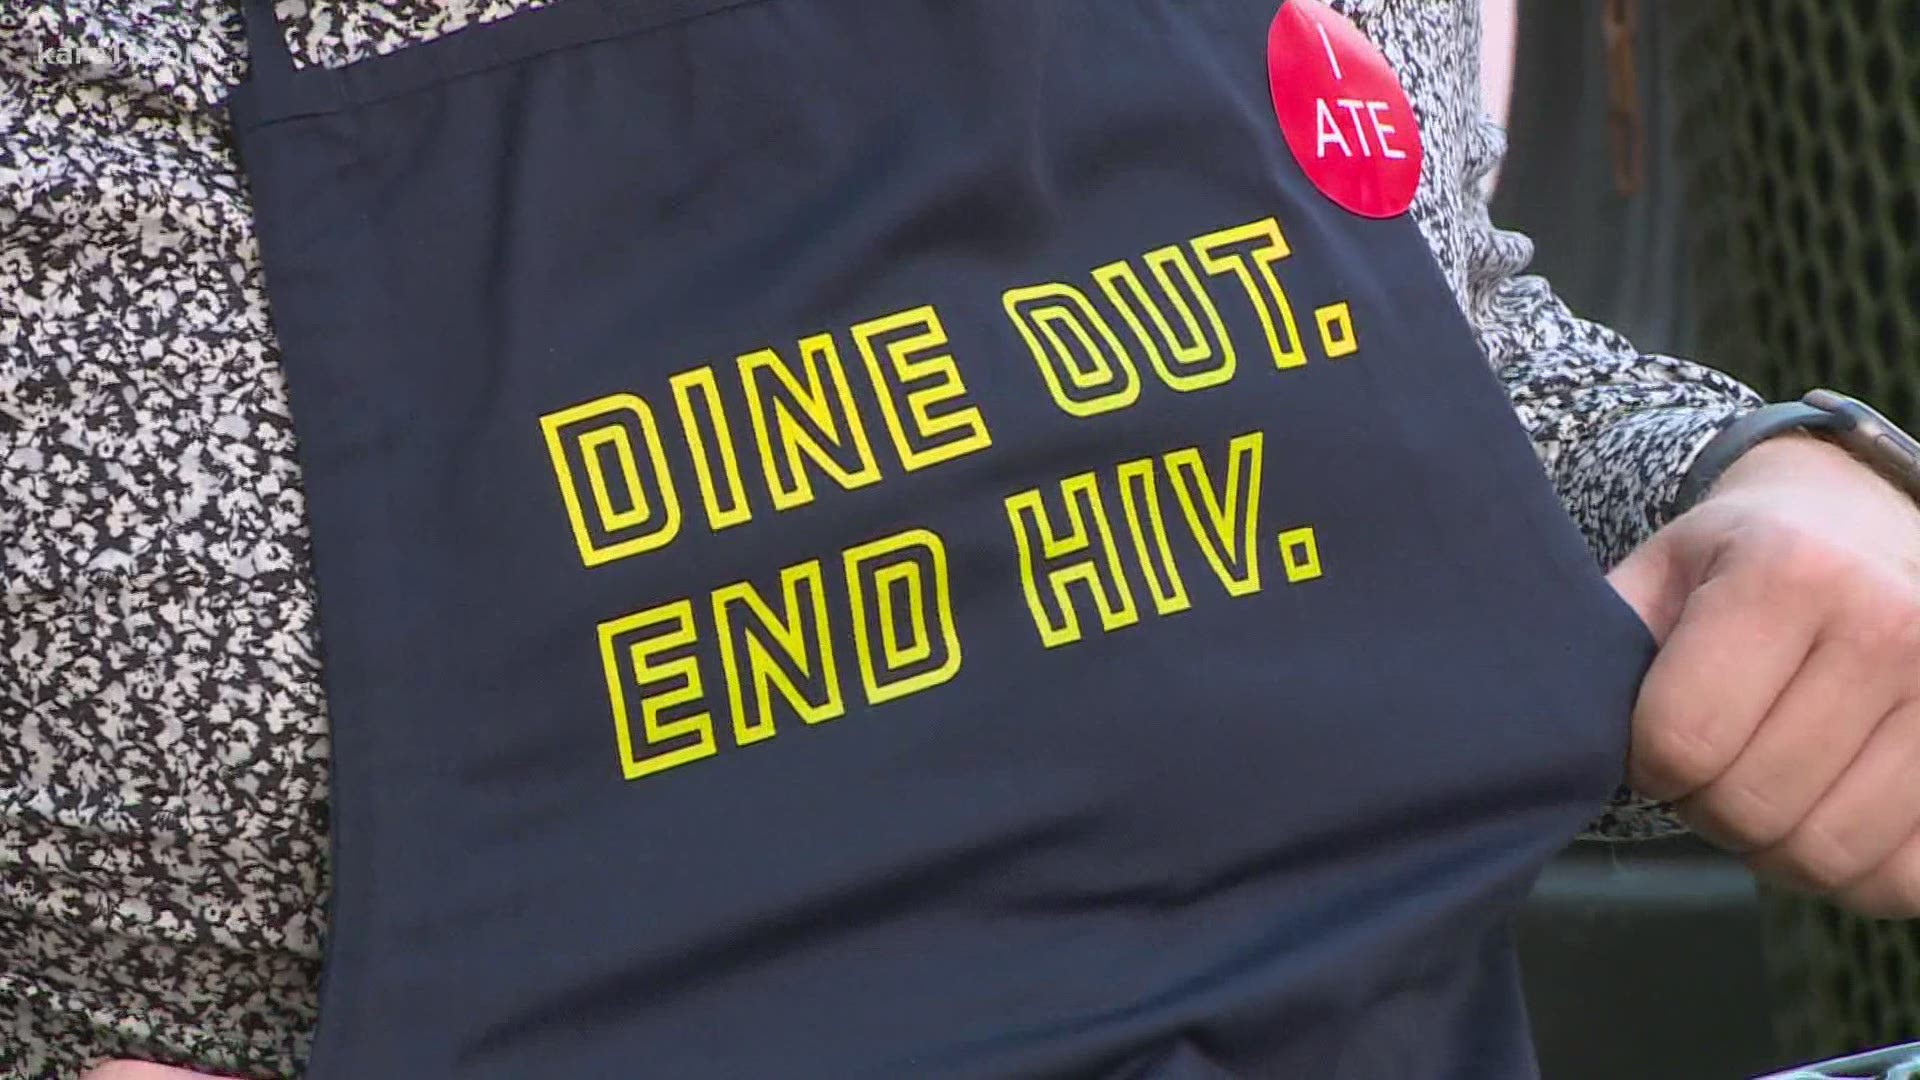 Dining Out for Life has a new name this year, Dining In for Life, but the mission to help Minnesotans living with HIV and Aids remains.